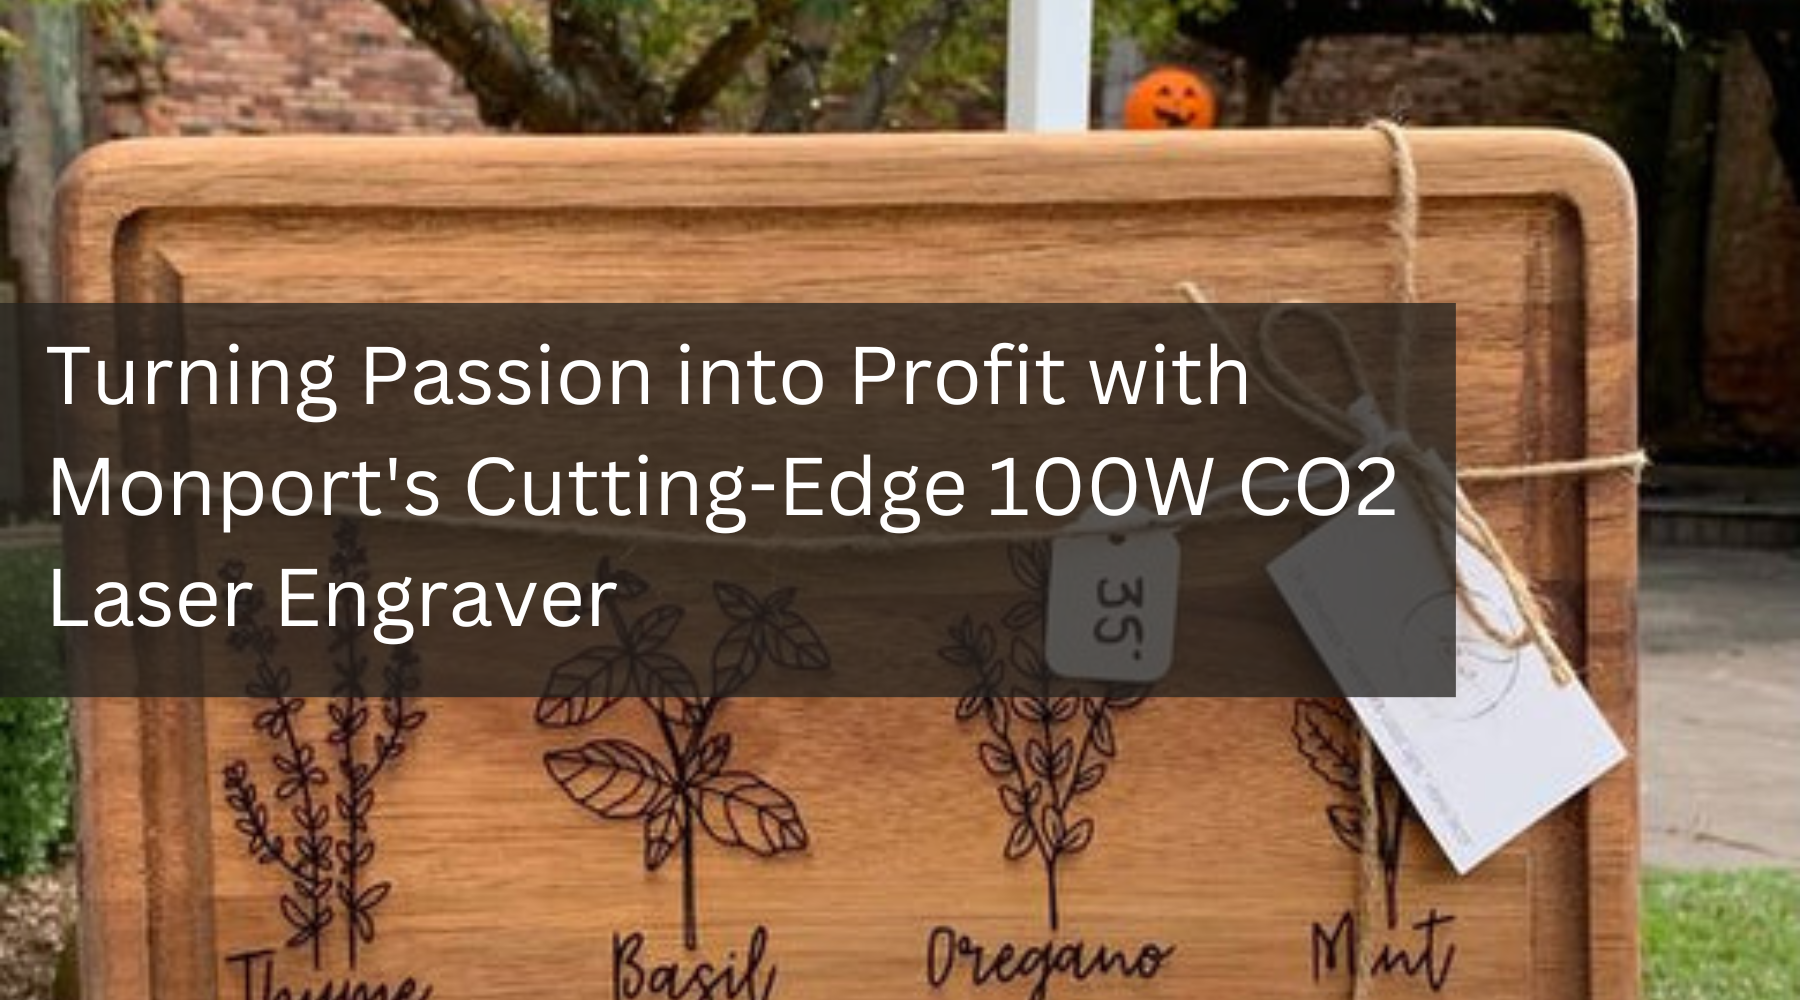 Turning Passion into Profit with Monport's Cutting-Edge 100W CO2 Laser Engraver